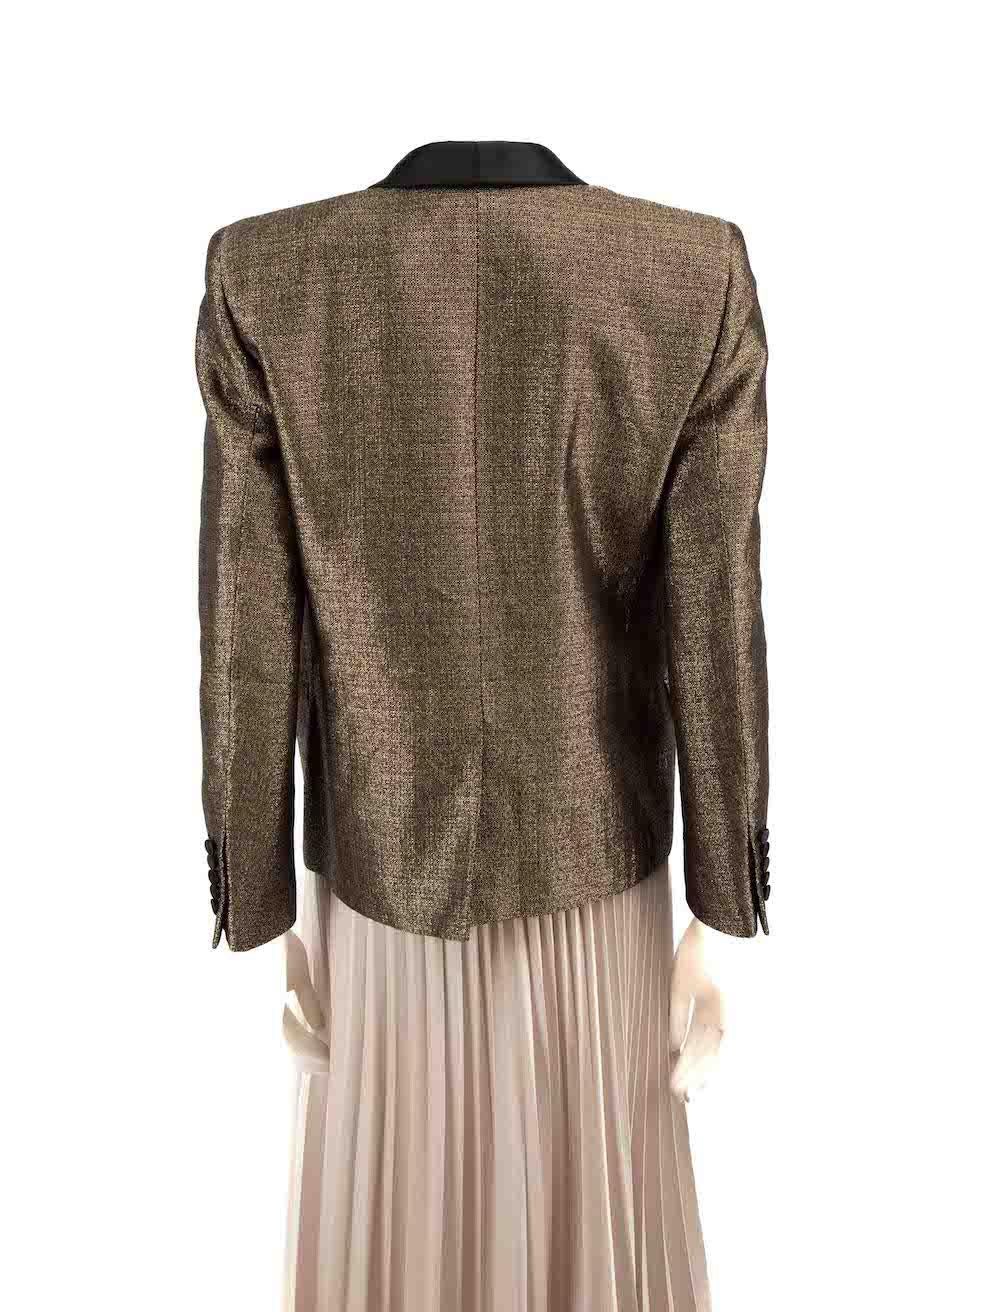 Saint Laurent Gold Wool Jacquard Blazer Jacket Size L In Excellent Condition For Sale In London, GB